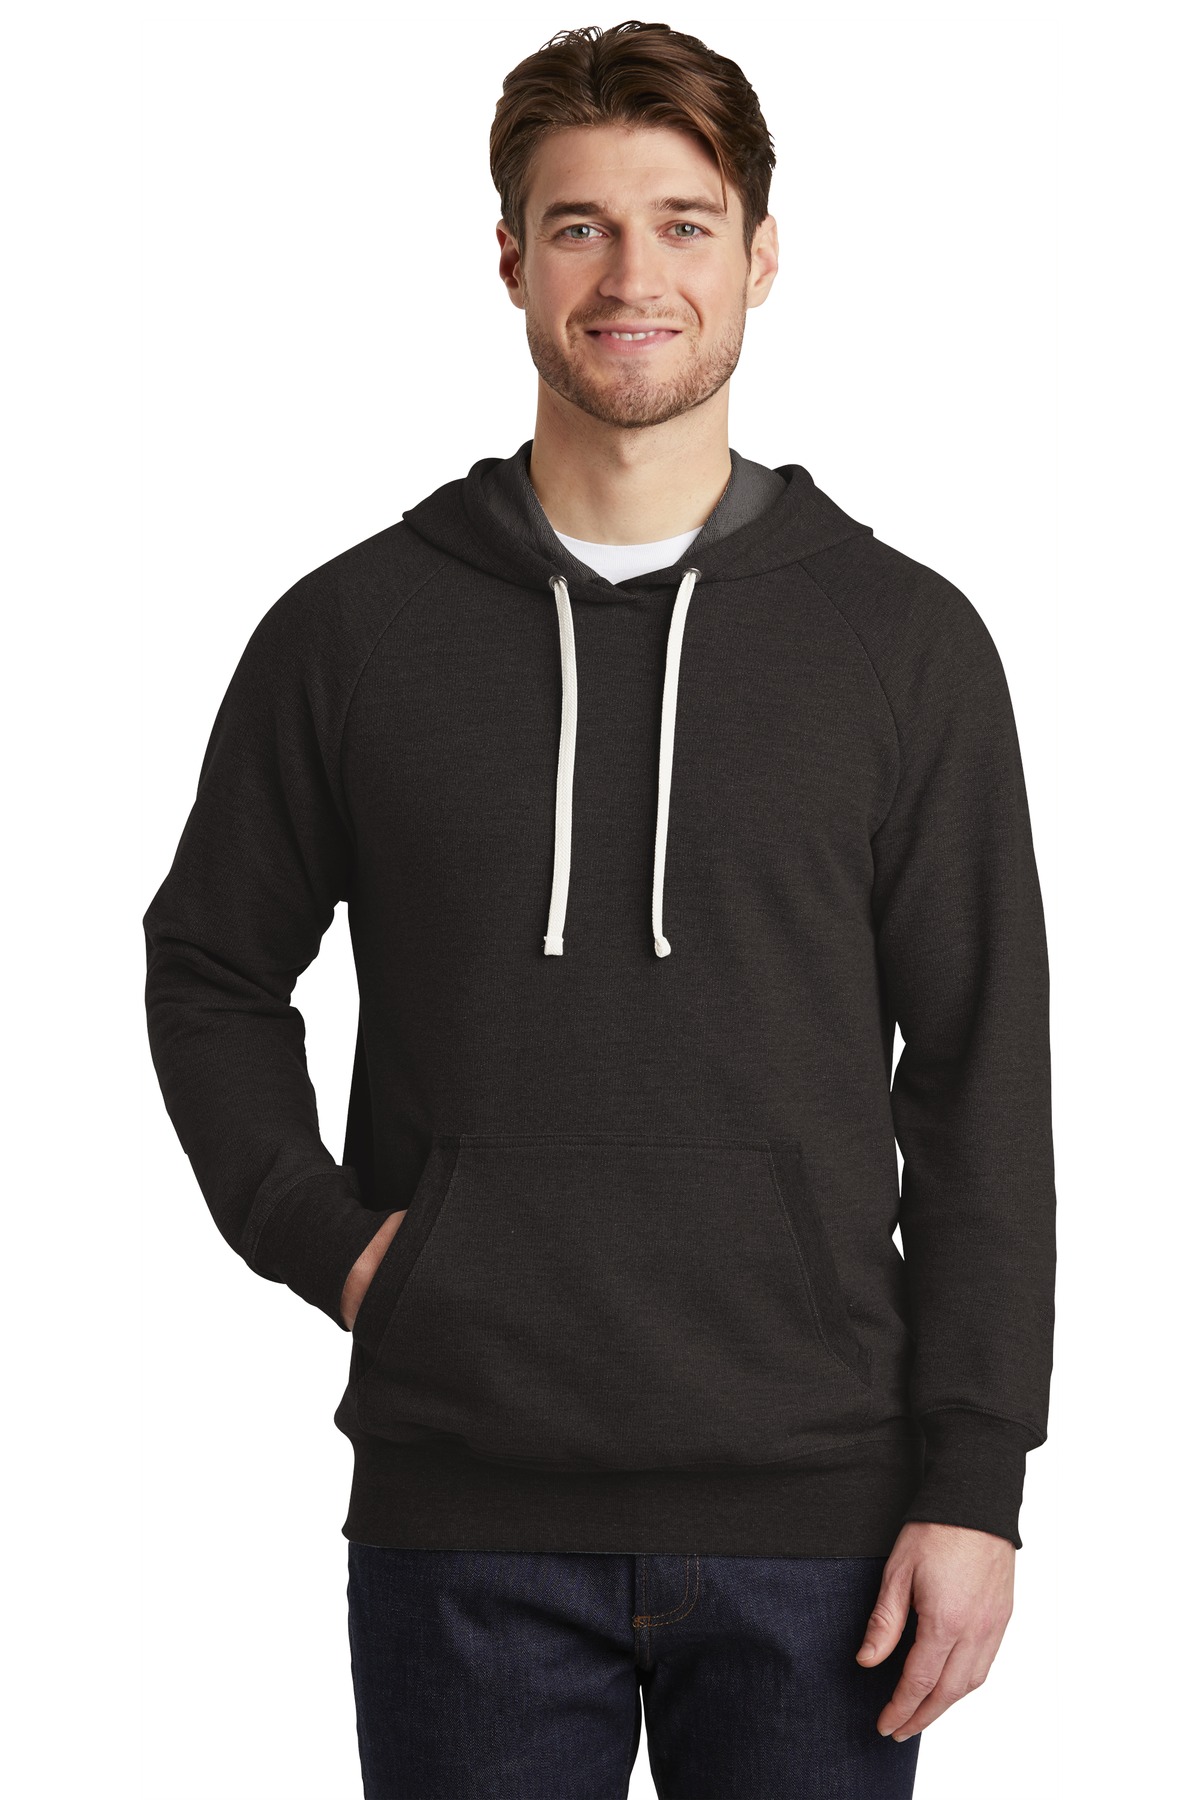 District Hospitality Sweatshirts & Fleece ® Perfect Tri ® French Terry Hoodie.-District